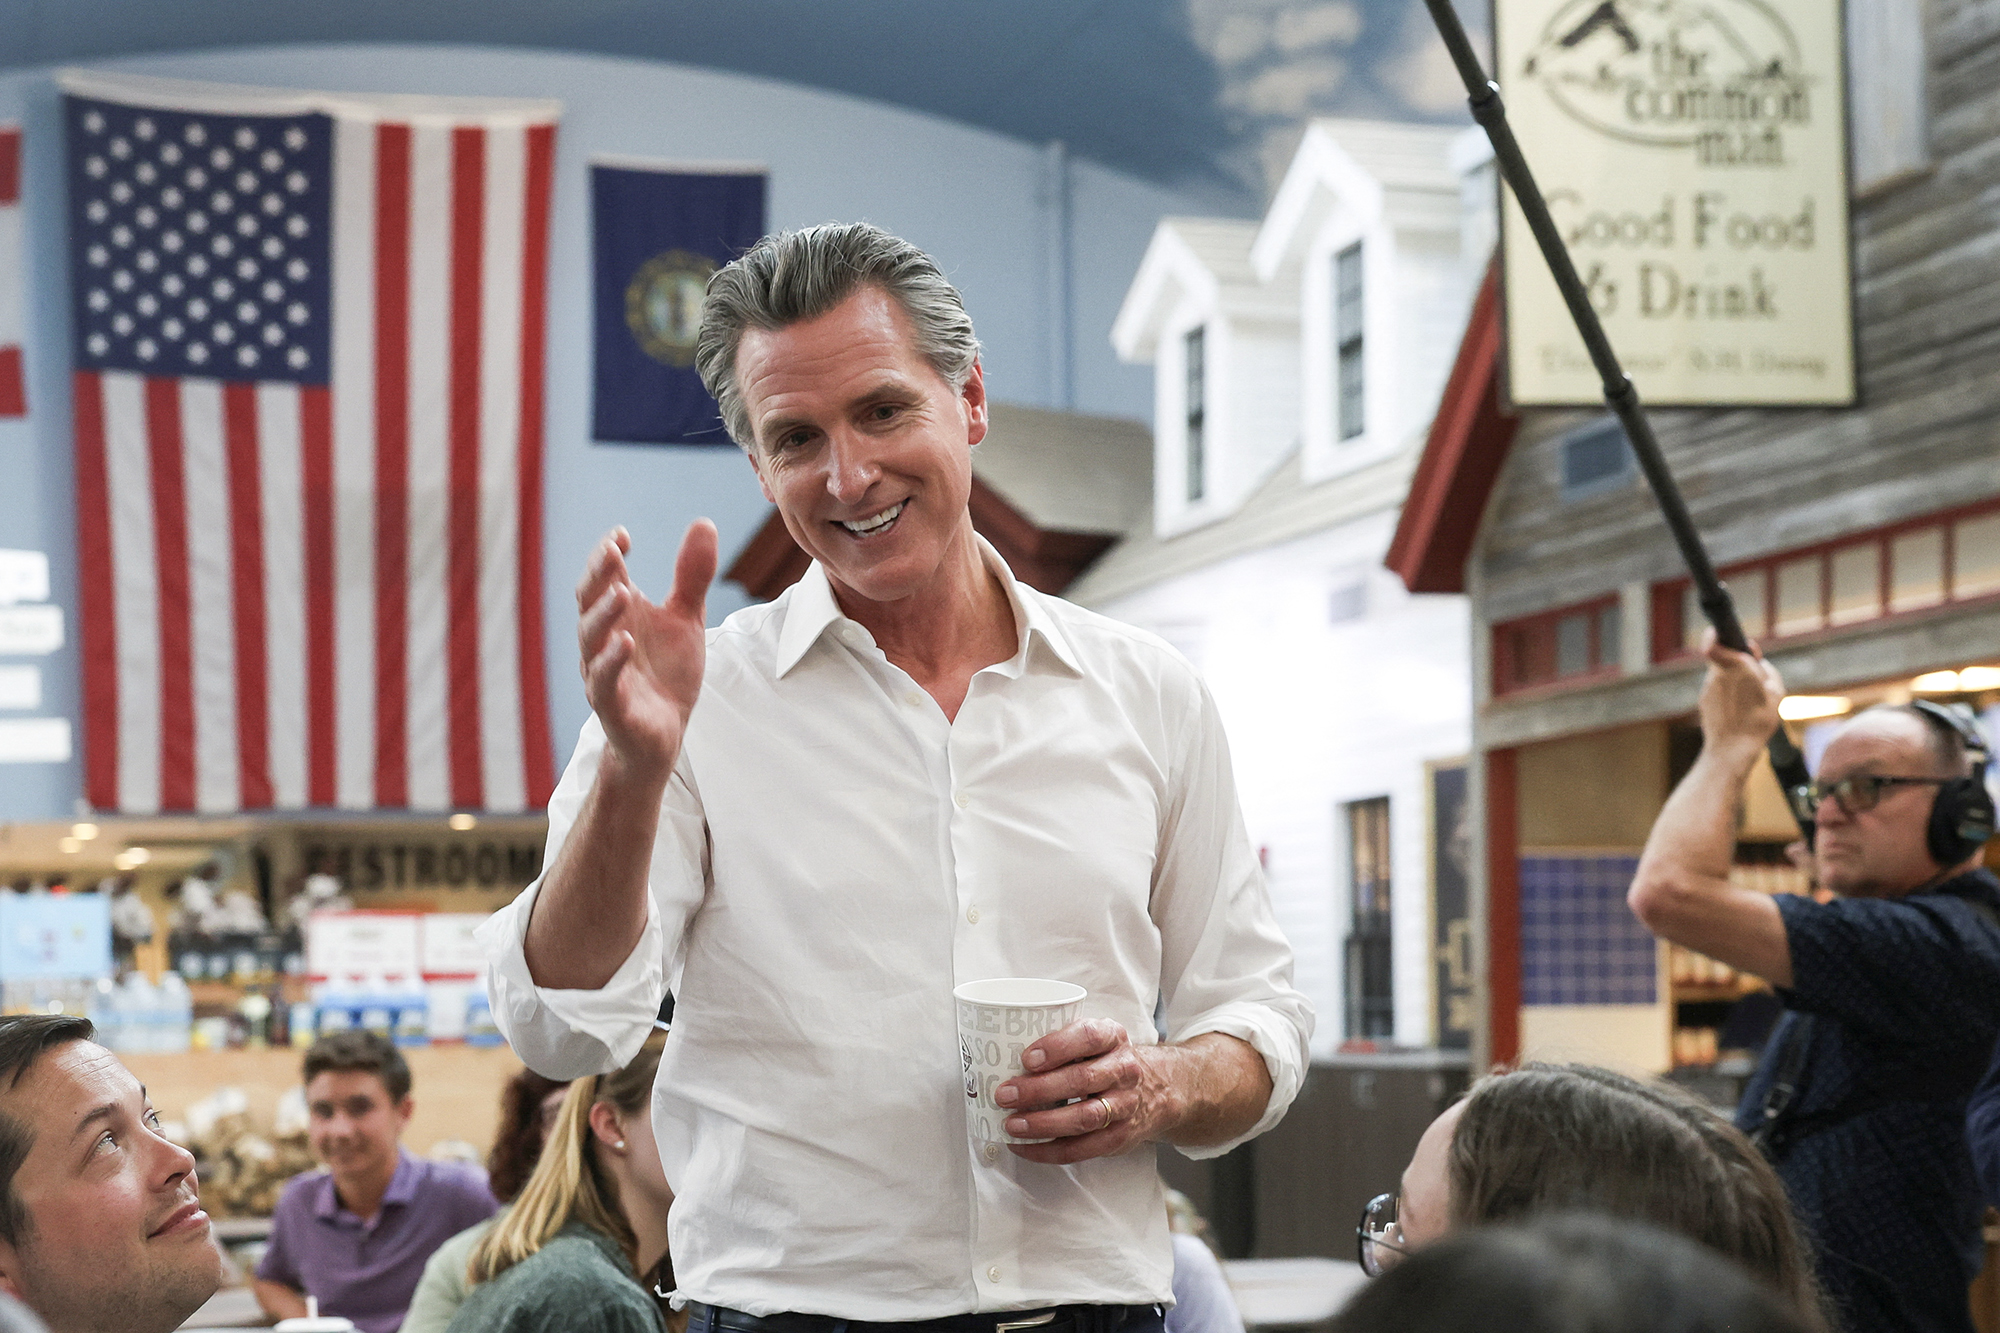 Gov. Gavin Newsom, who is in New Hampshire to attend a fundraising event for U.S. President Joe Biden's campaign, greets people at the Common Man Roadside Cafe & Deli in Hooksett, New Hampshire, on July 8, 2024. Photo by Reba Saldanha, Reuters